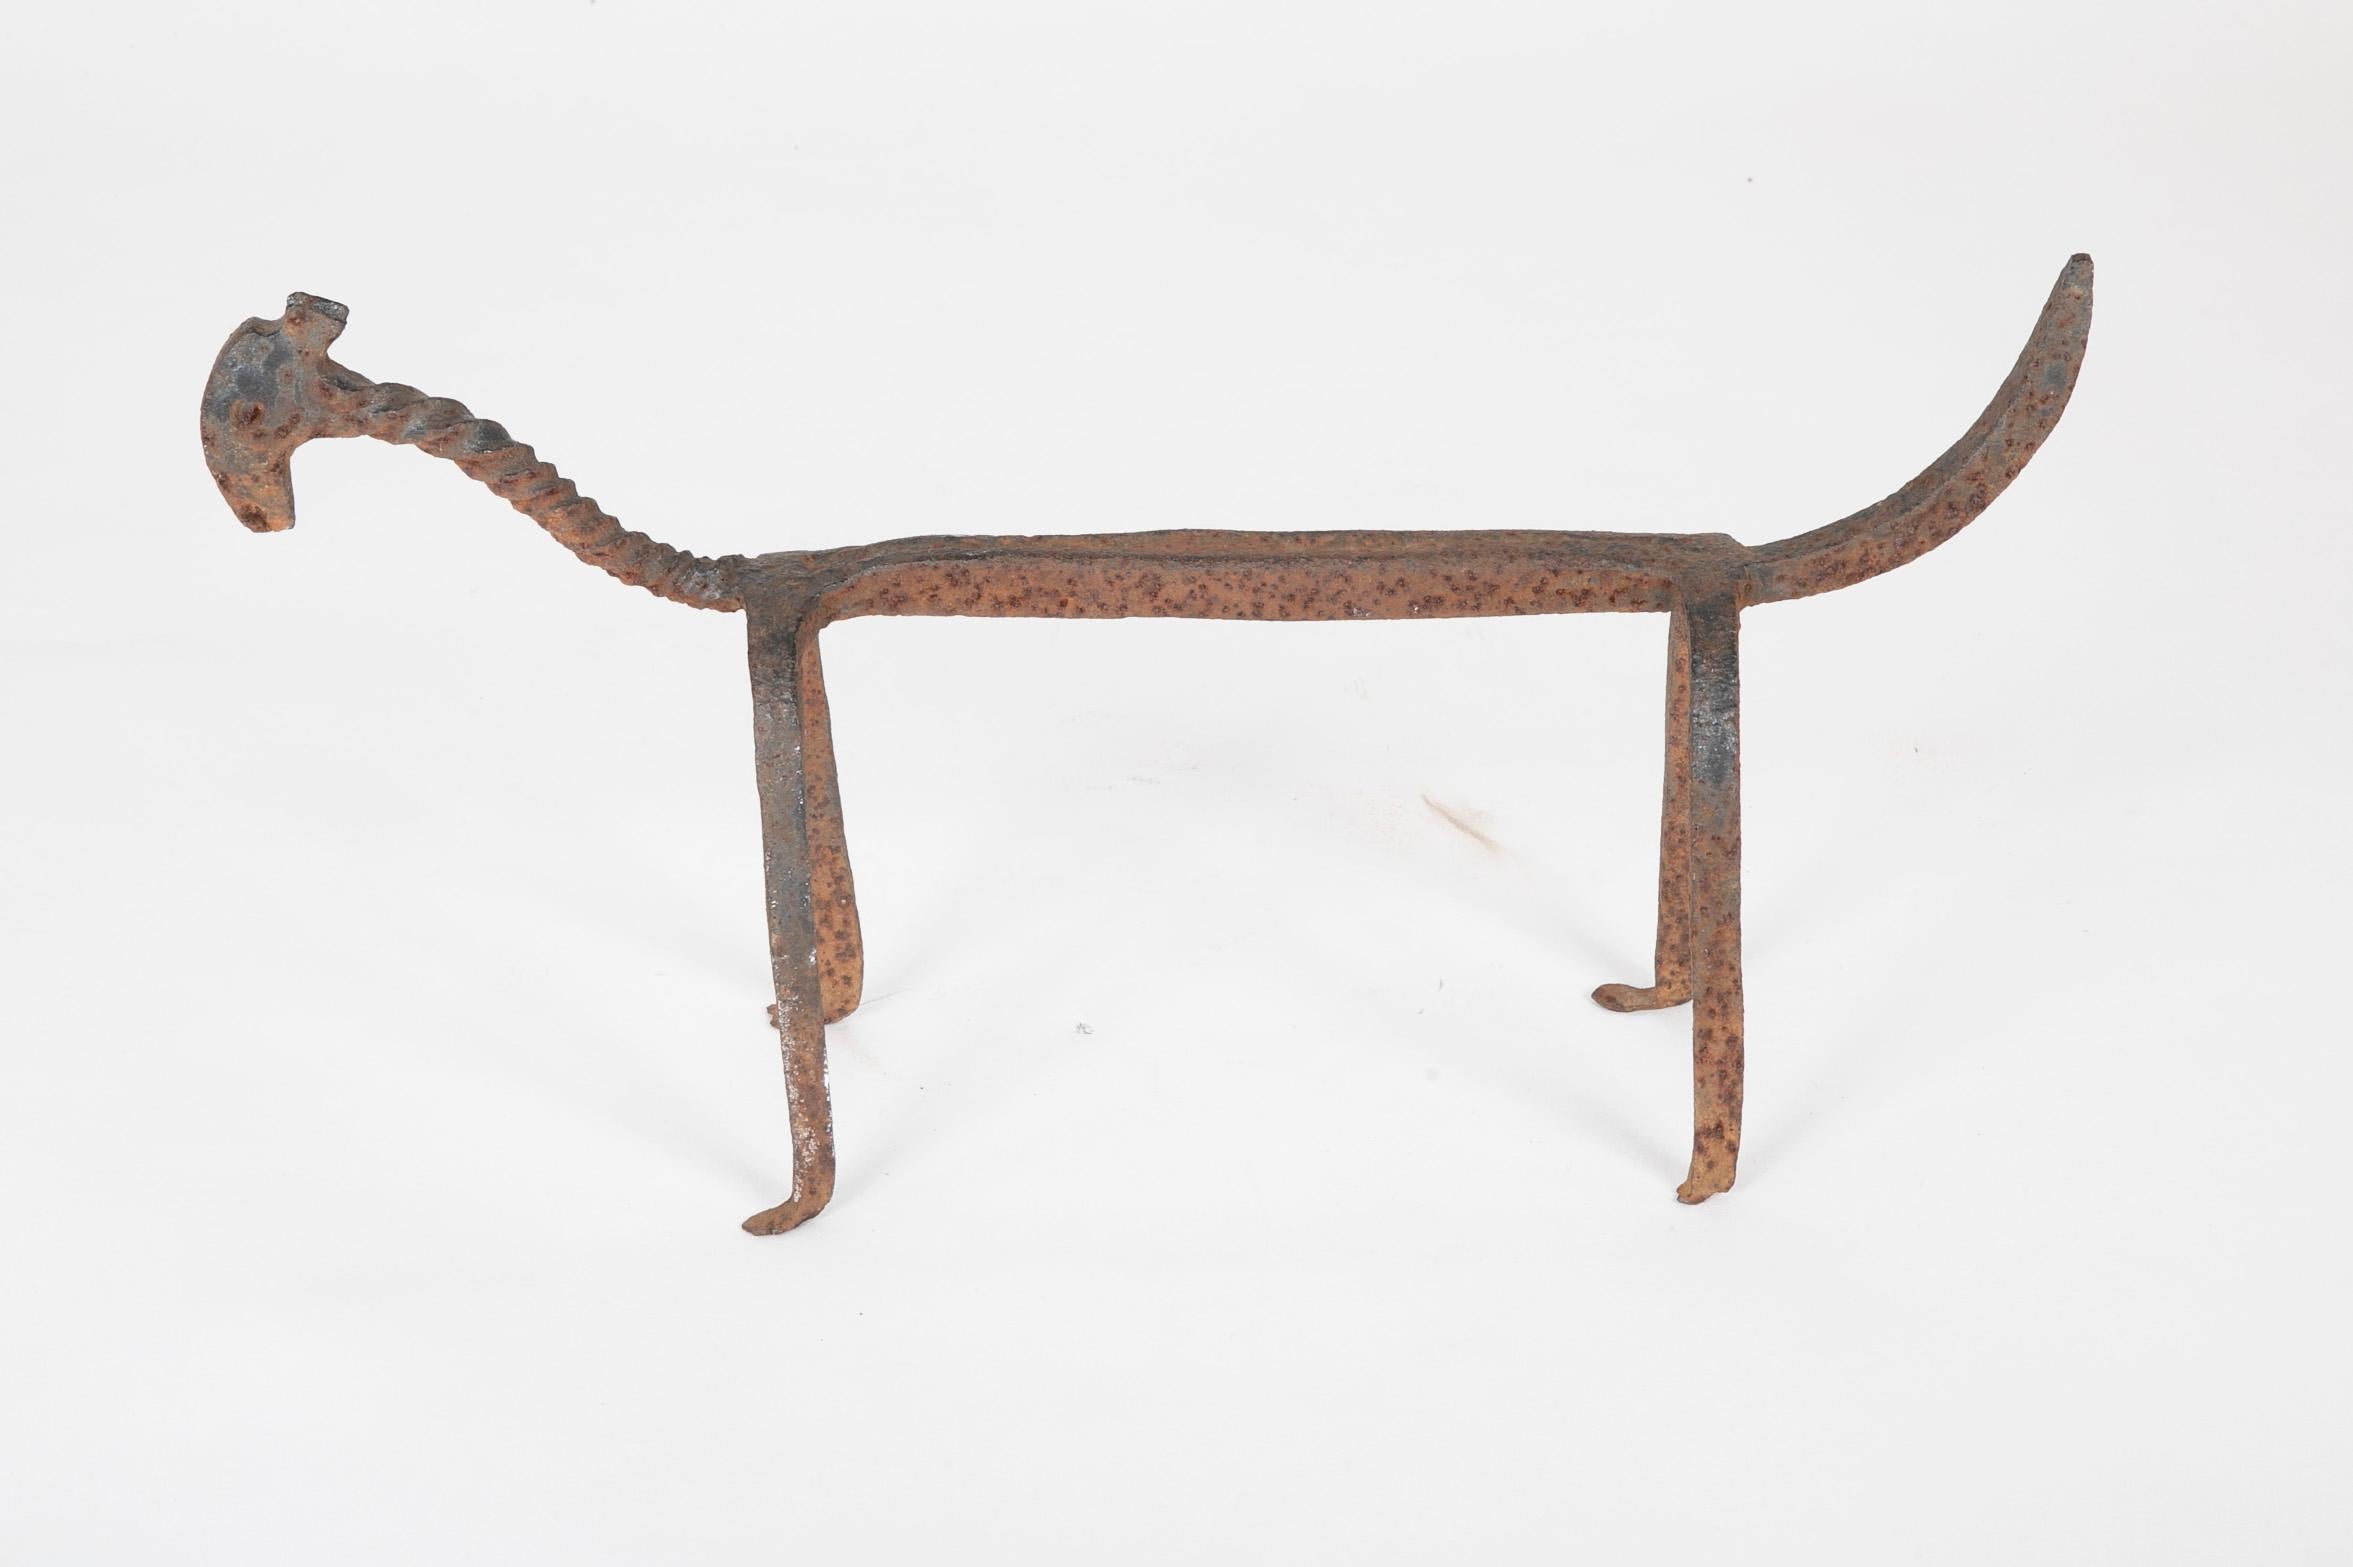 A wonderful anthropomorphic log rest or andiron in the form of a dog. This is a fully realized piece of sculpture with real charm and personality. Like a great piece of Outsider Art. 17th century Italian. 
Measures: 16.75 inches long by 8 high and